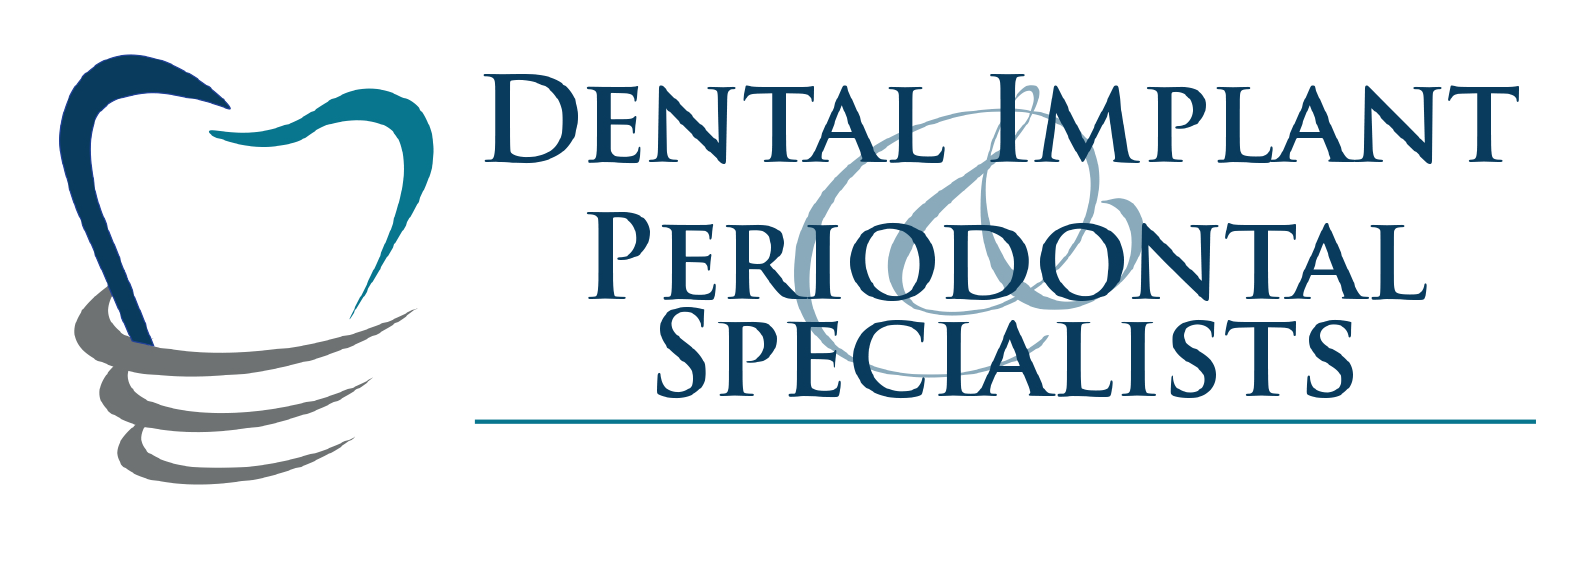 Dental Implant and Periodontal Specialists